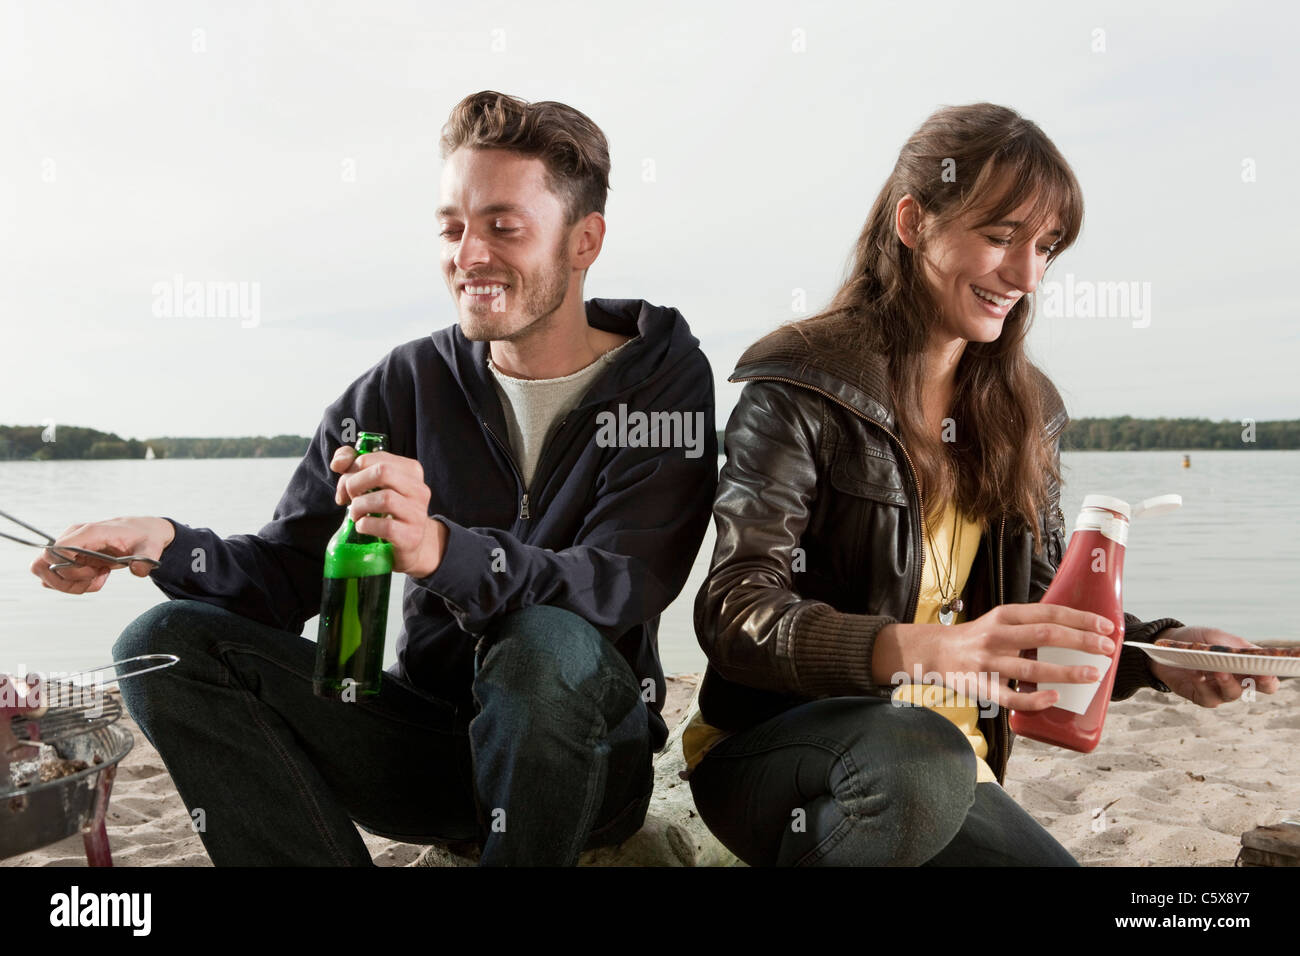 Allemagne, Berlin, le lac de Wannsee, Young couple having a barbecue Banque D'Images